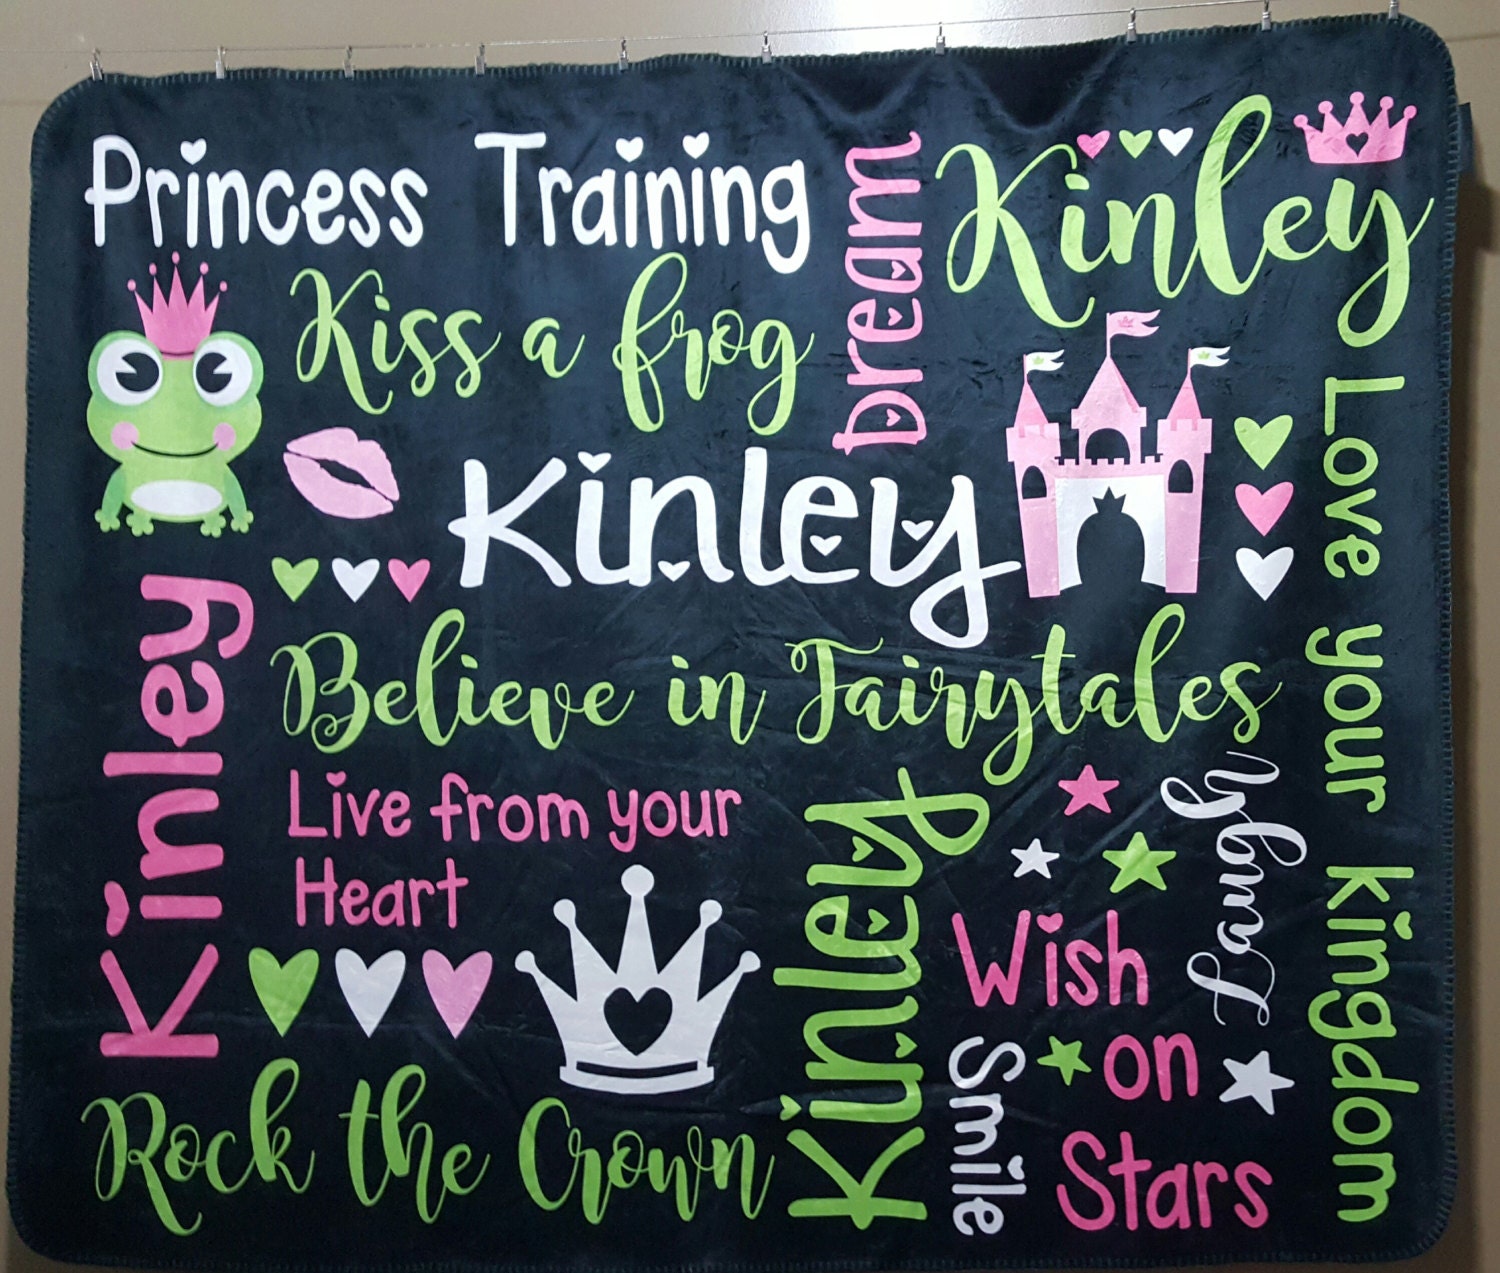 Personalized Baby Blanket, Personalized Baby Gift, Custom Blanket, Princess, Baby Blanket, Personalized Blanket, Personalised Baby Blanket